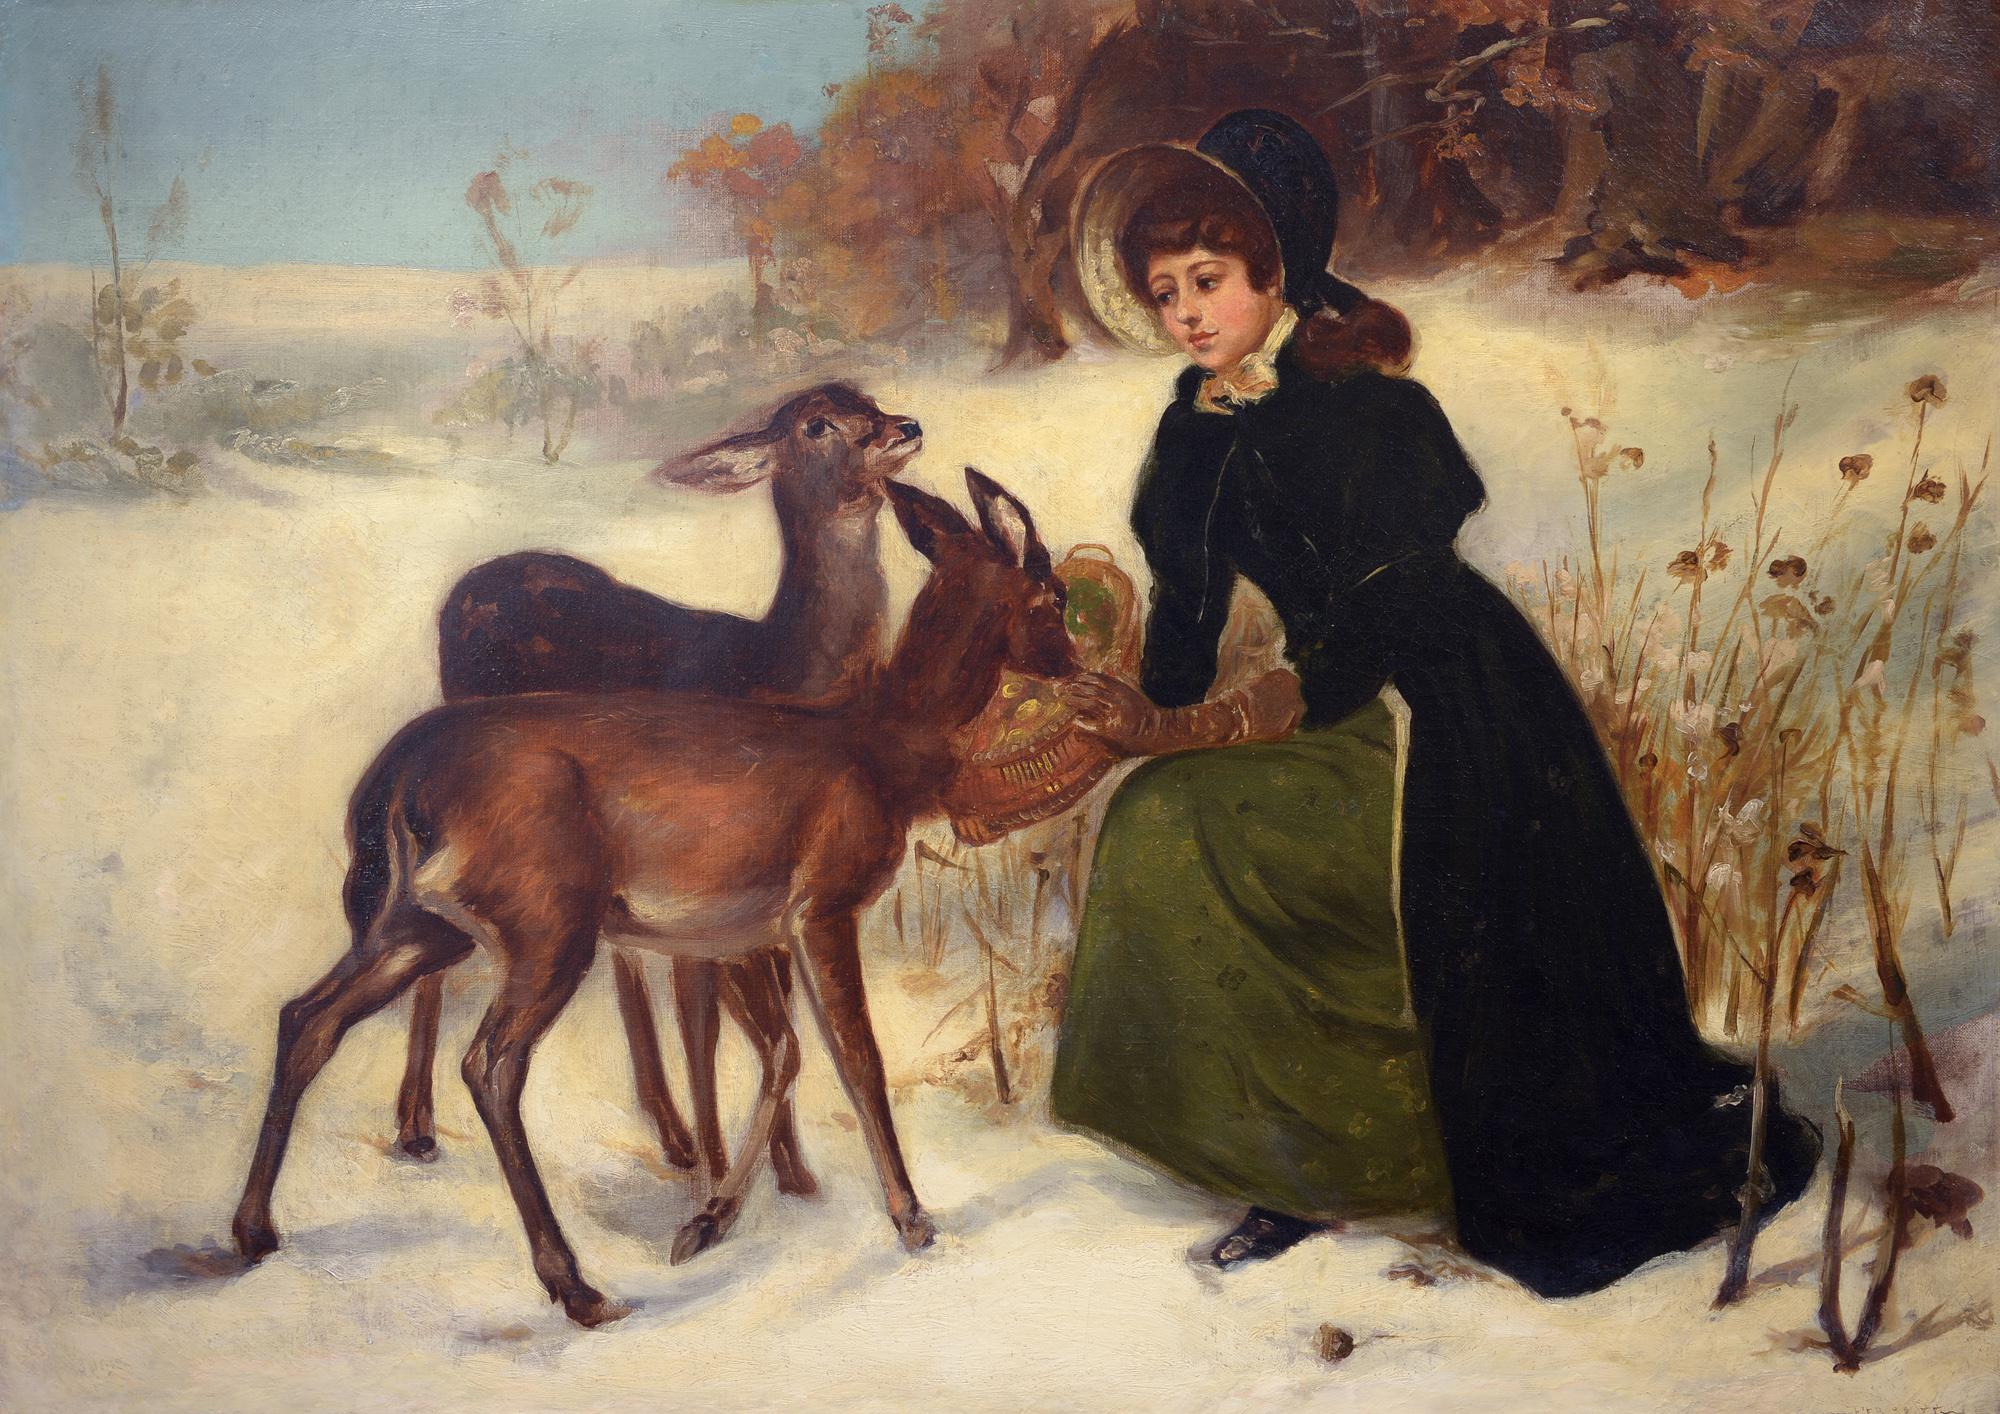 "Winter Deer, " American Realist, Landscape with Figure and Animals, MFA, Tate